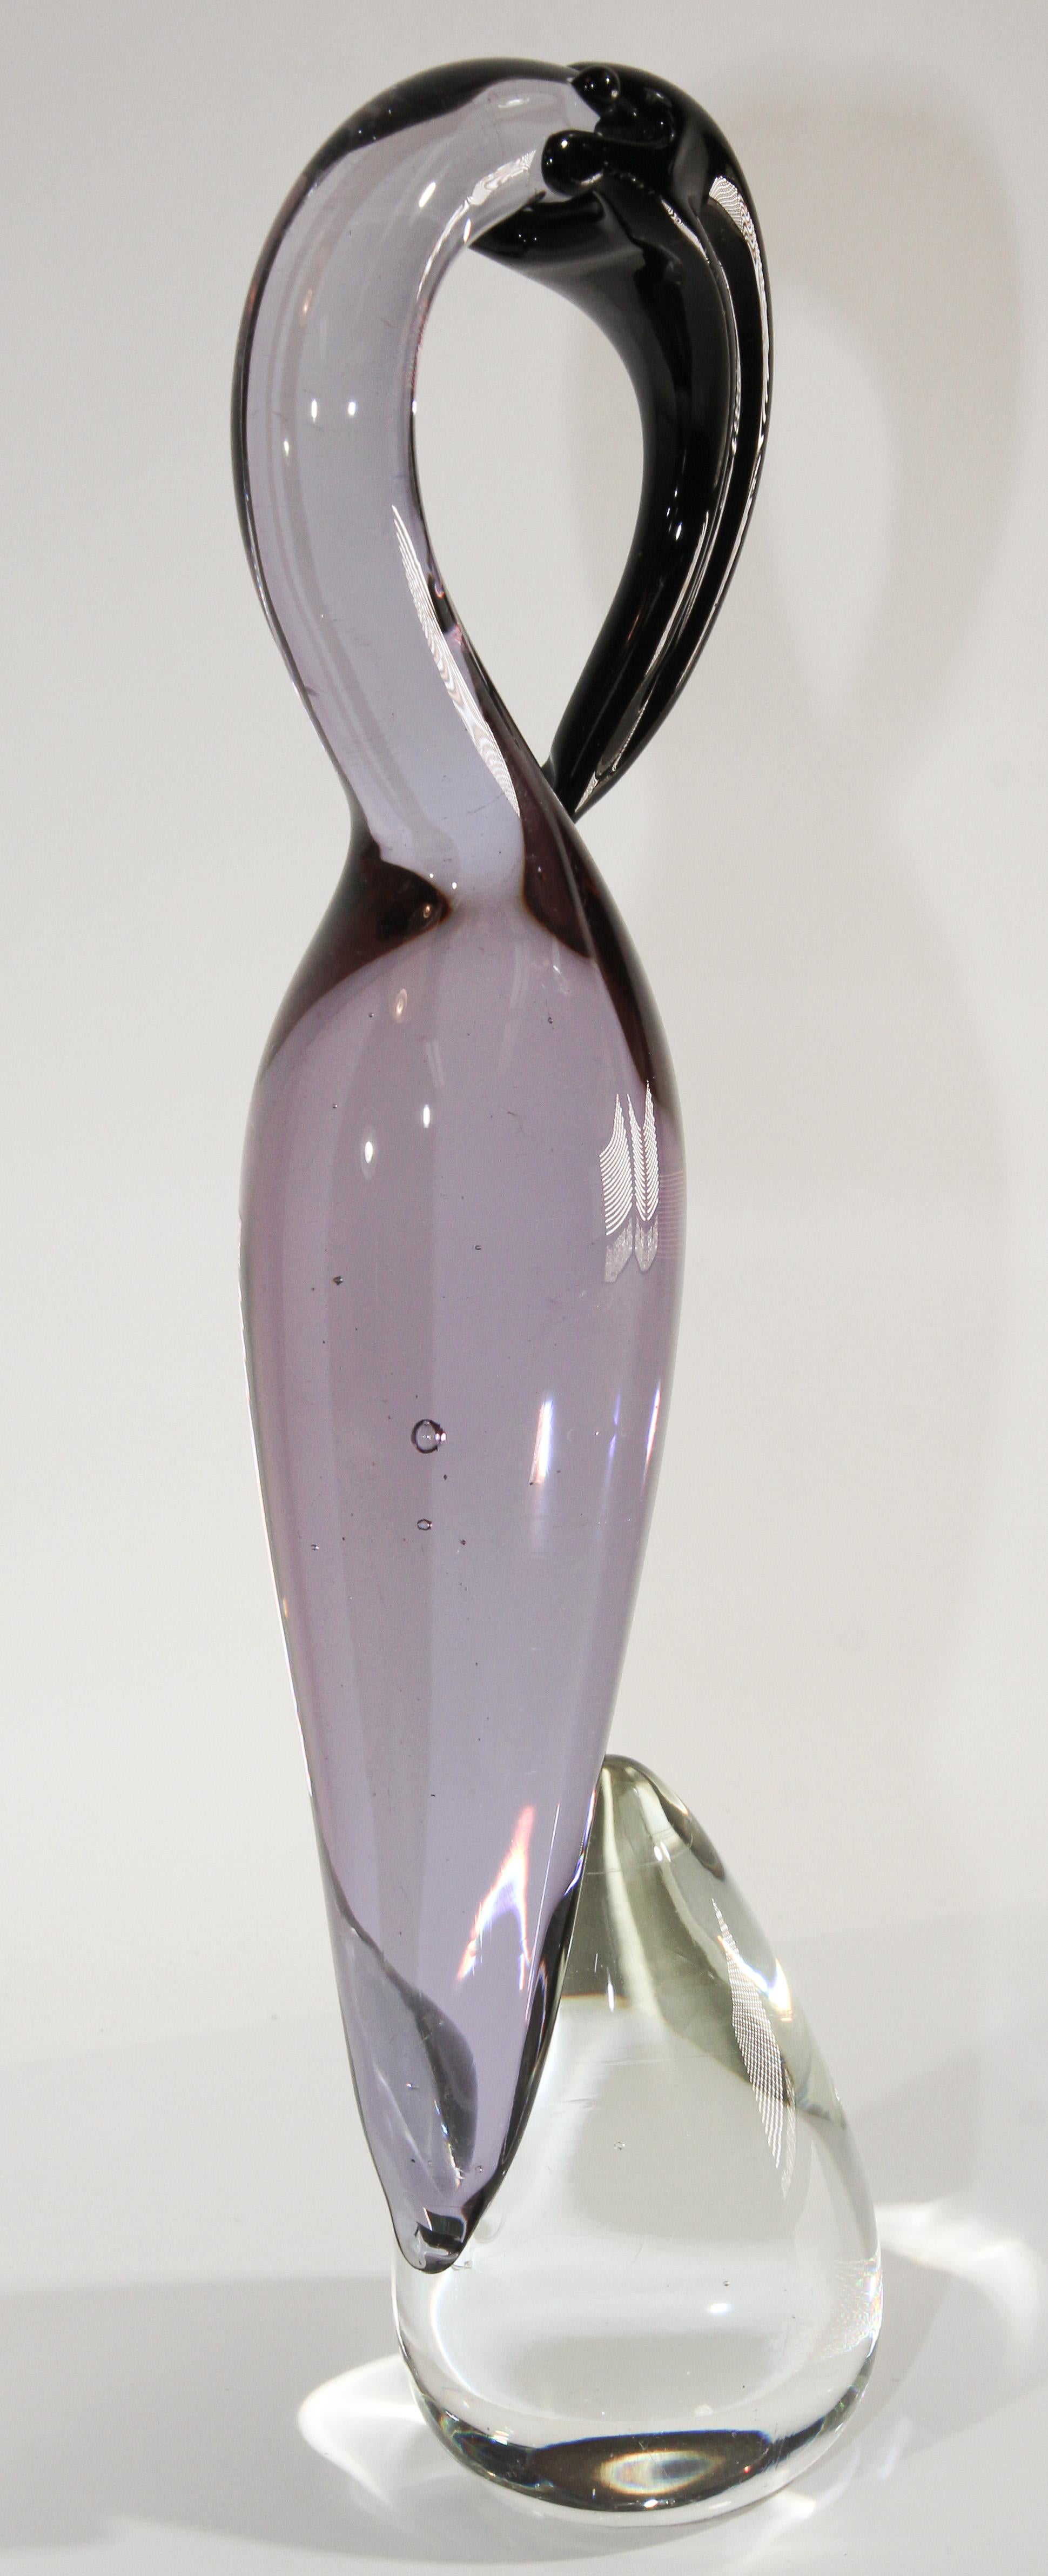 Vintage collectible Murano art glass hand blown sculpture of a crane in clear and purple colored glass.
Handcrafted beautiful Mid-Century Modern hand blown art glass Italian figurine decorated in clear and light pink purple and black.
This exquisite